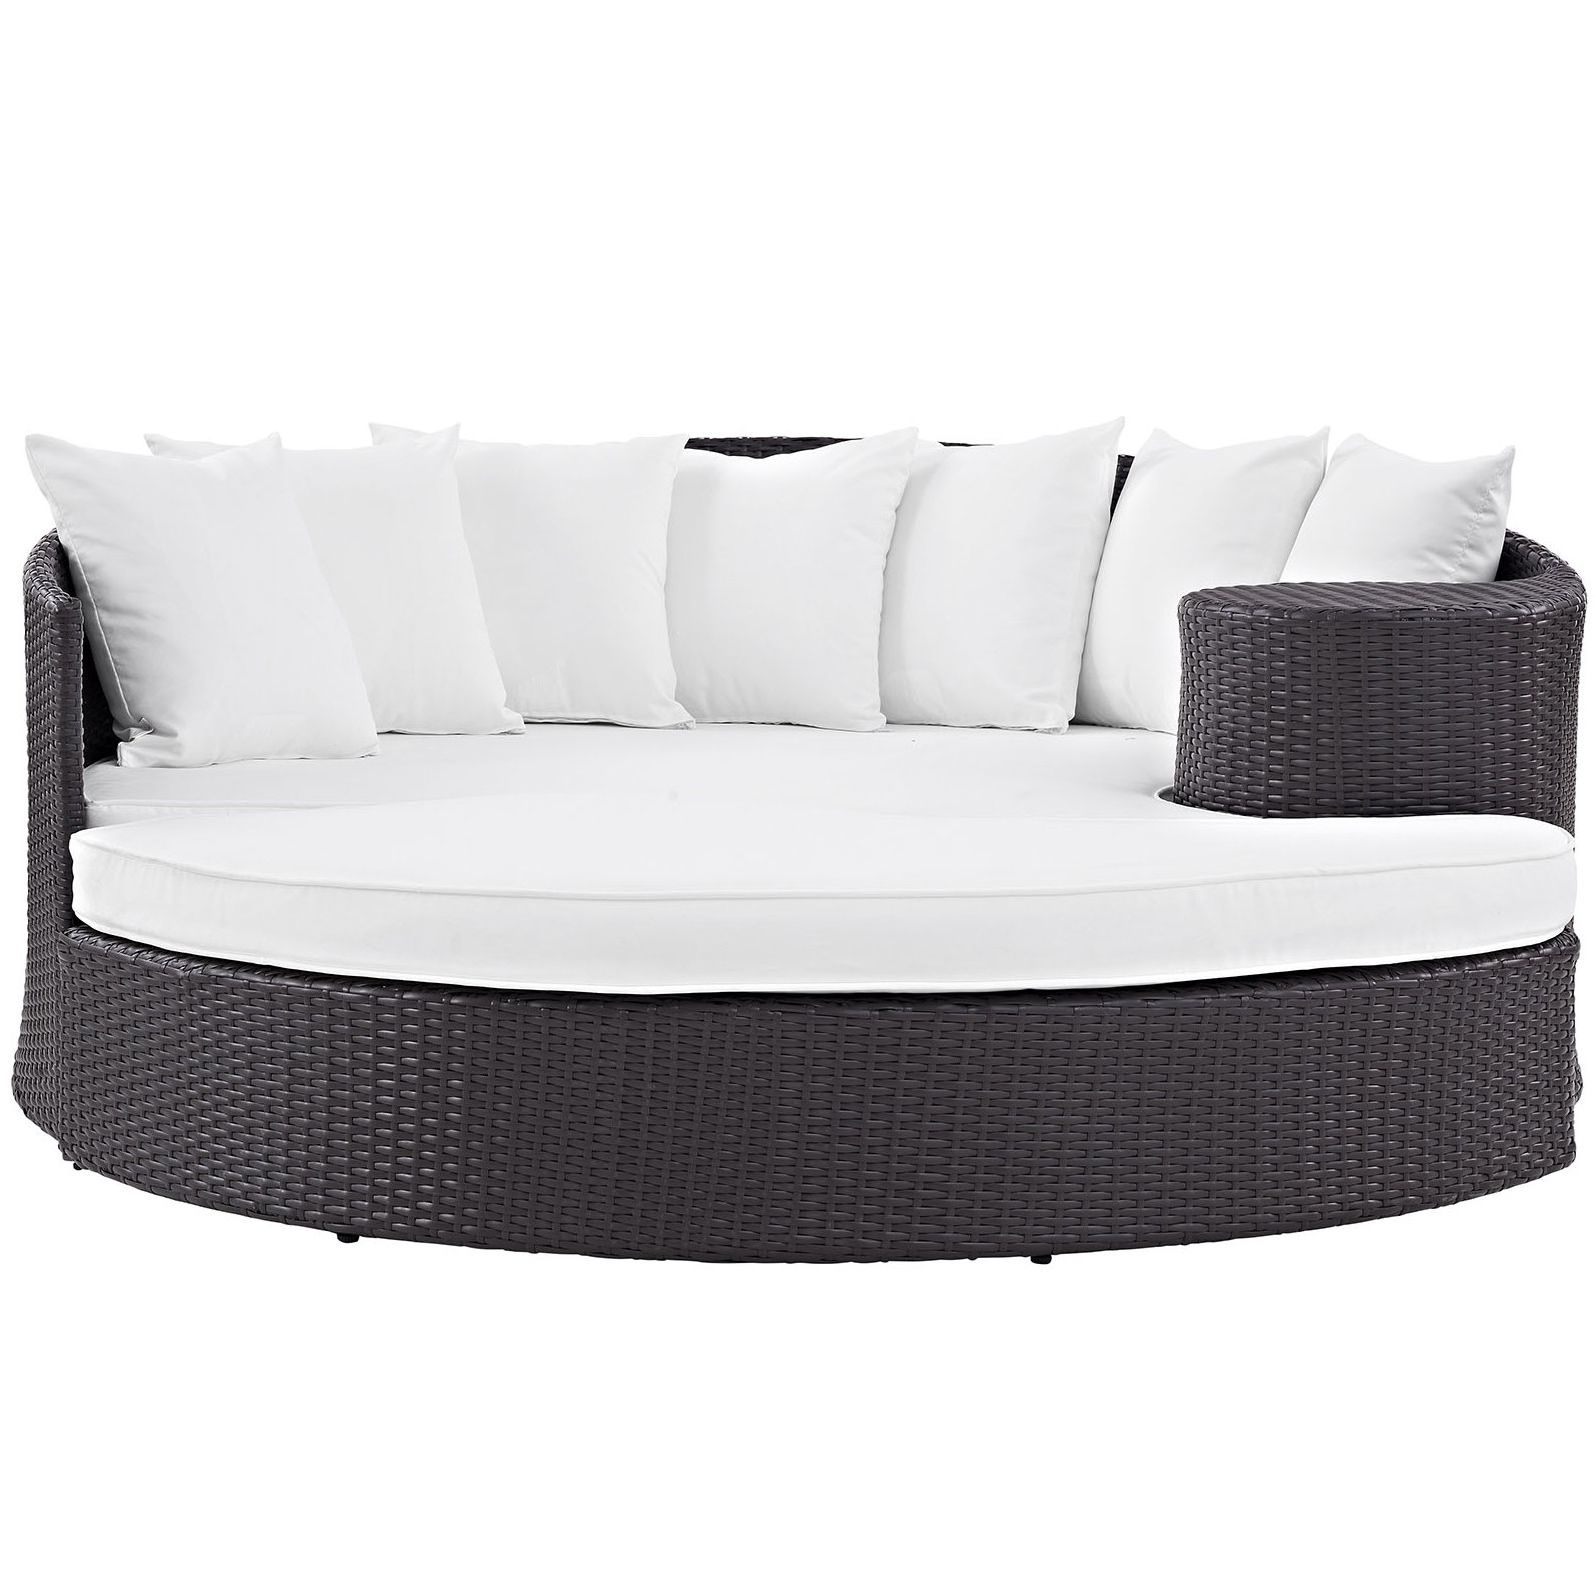 Recent Freeport Patio Daybeds With Cushion Pertaining To Brentwood Patio Daybed With Cushions (View 11 of 20)